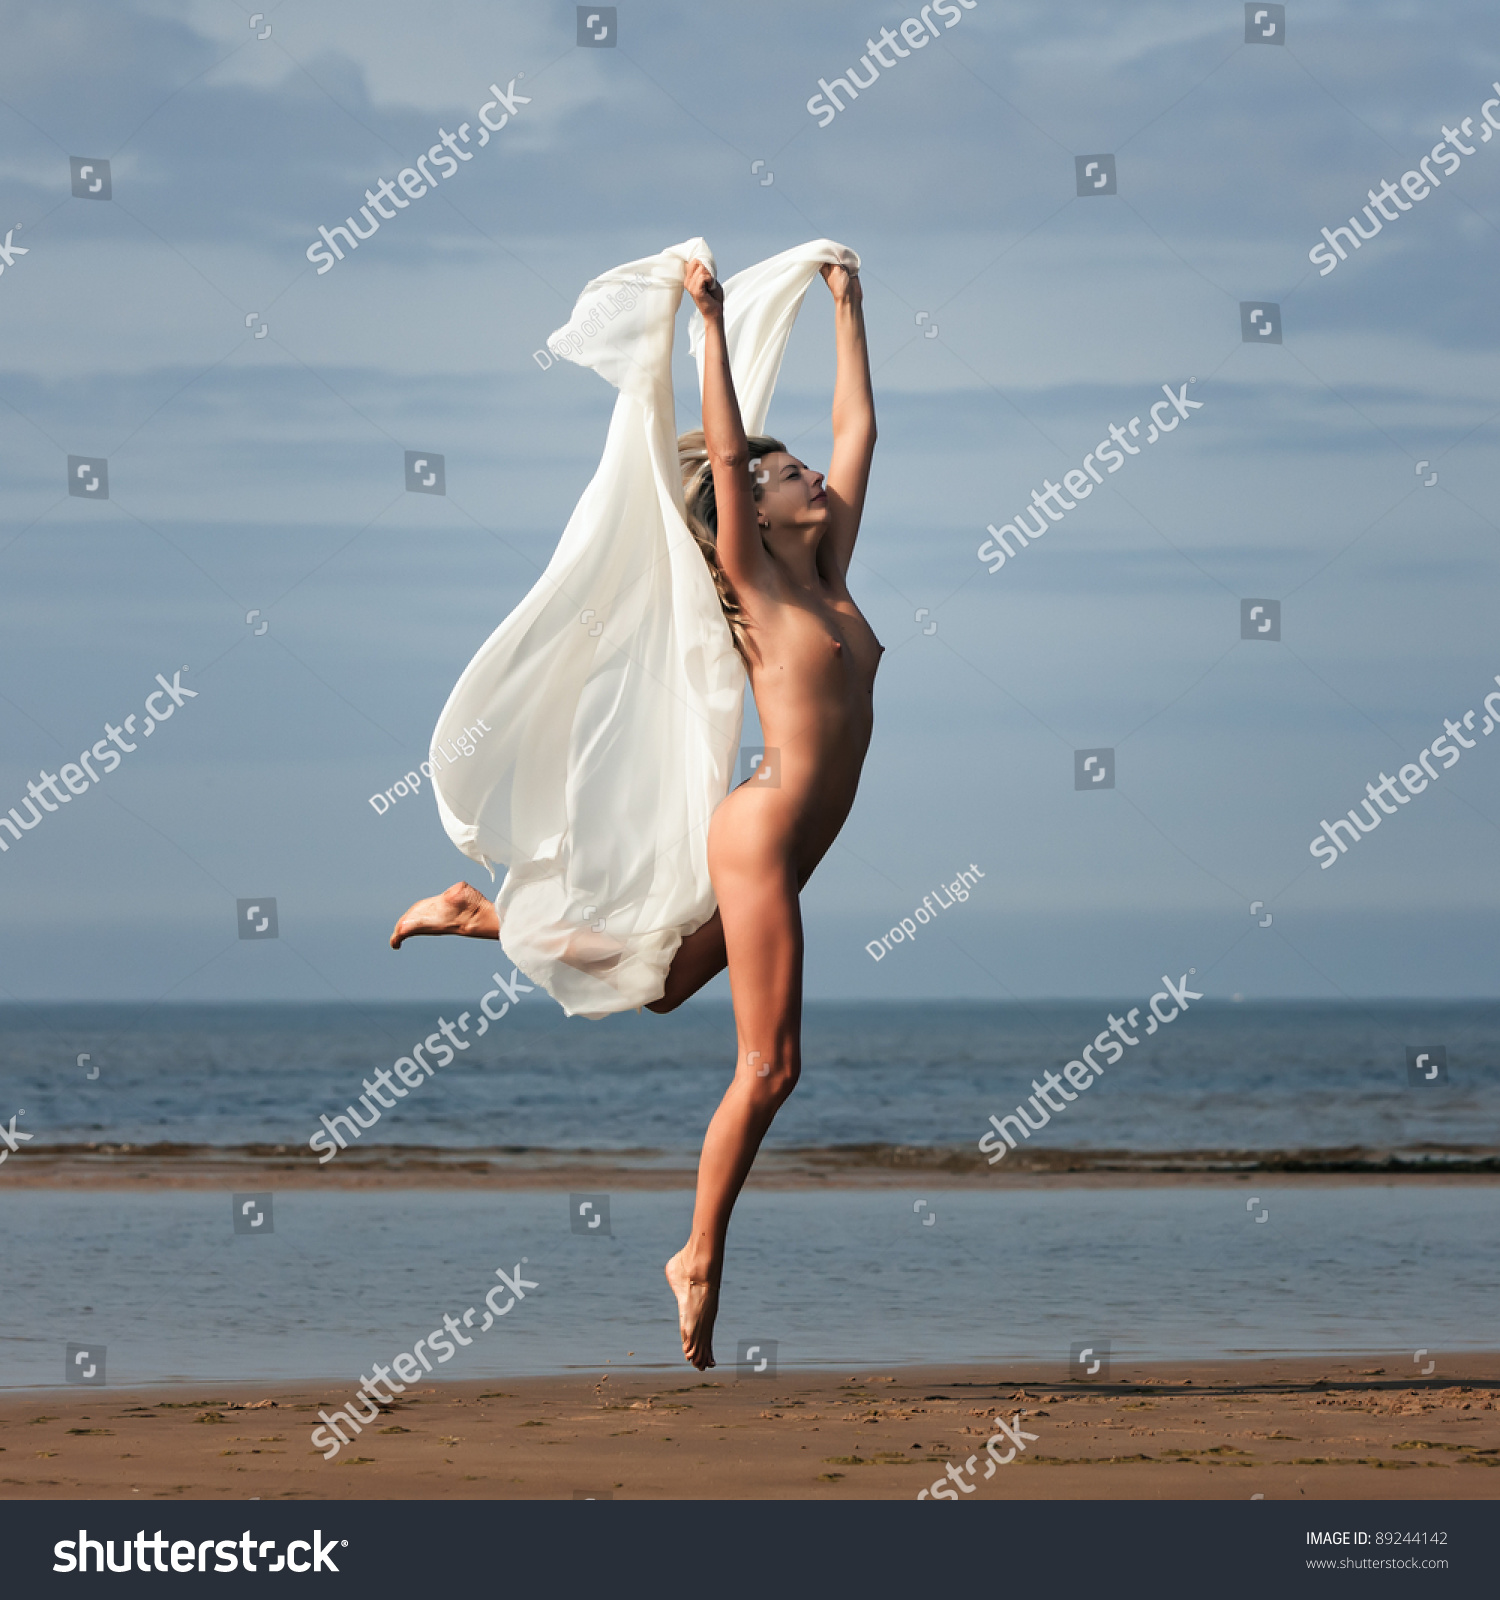 nude girl jumping pic